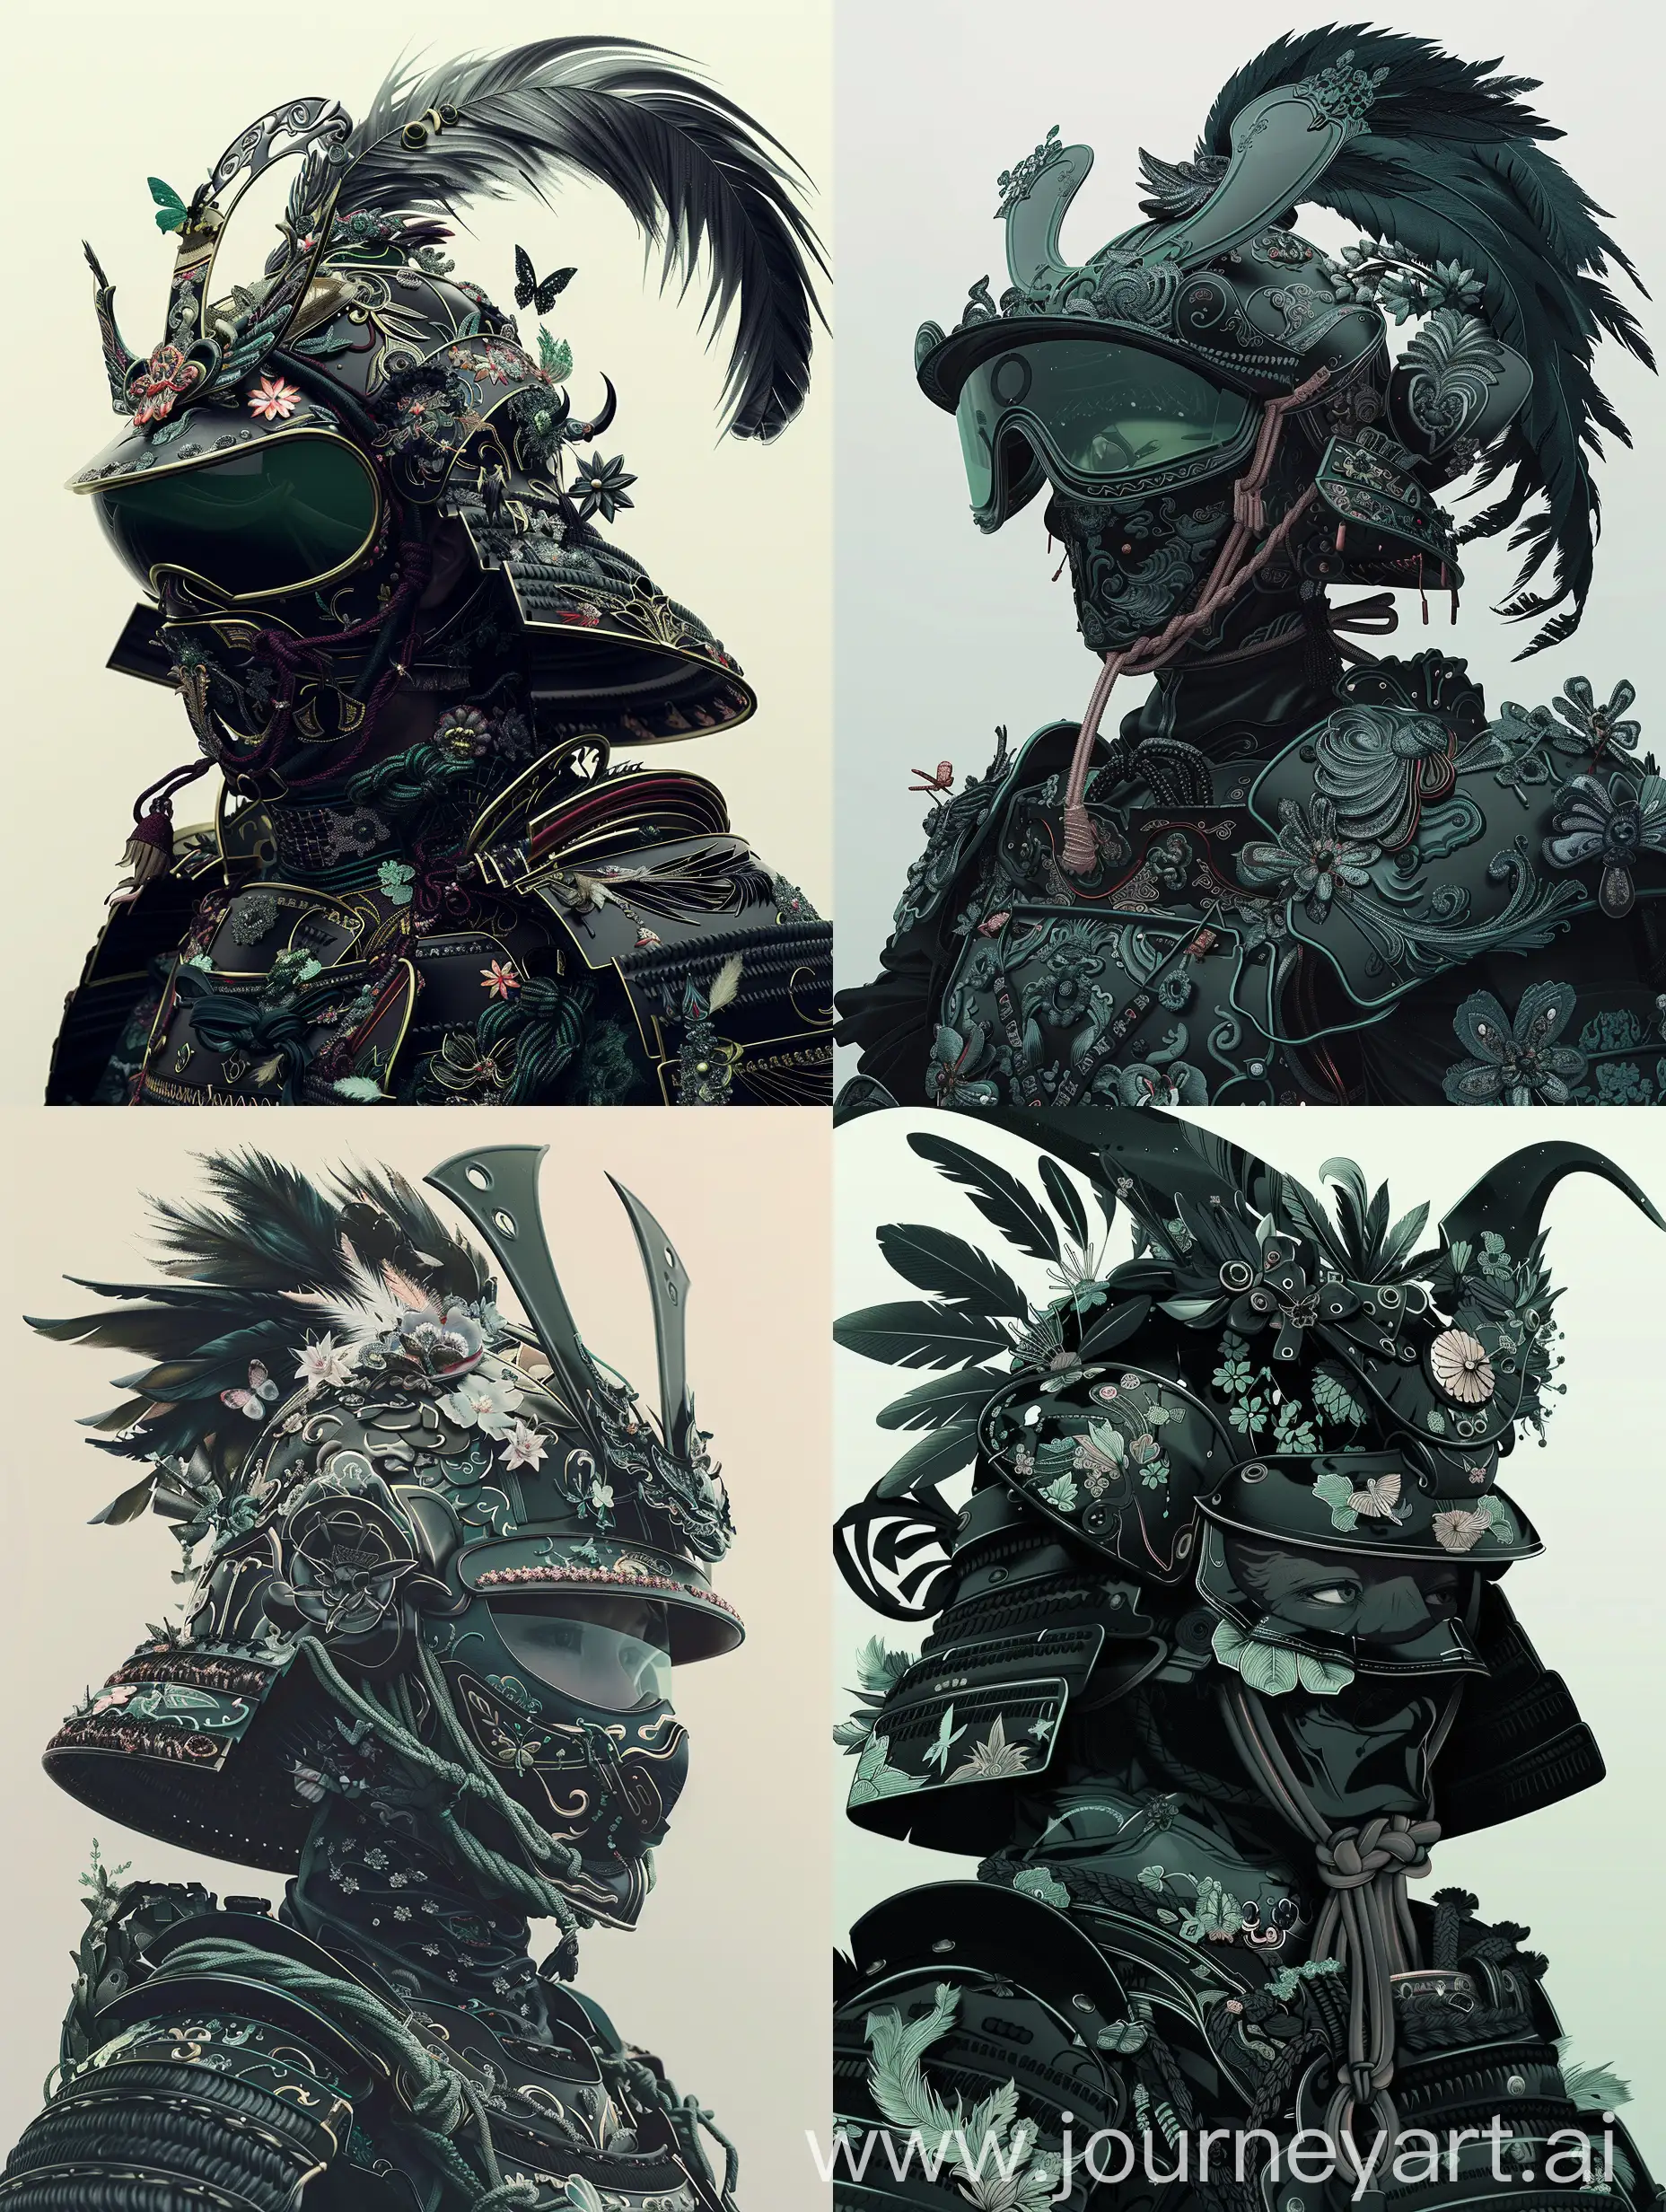 A highly detailed and ornate samurai warrior wears an elaborate suit of armor in various shades of Black. The helmet features intricate decorations with feathered and floral elements, a large, curved crest and detailed embellishments. The mask and armor plates are adorned with delicate patterns, including flowers and butterflies, and the samurai's face is partially hidden behind tinted goggles. The overall color scheme is predominantly Green, creating a visually striking and unique look. The background is a plain, light Black gradient.